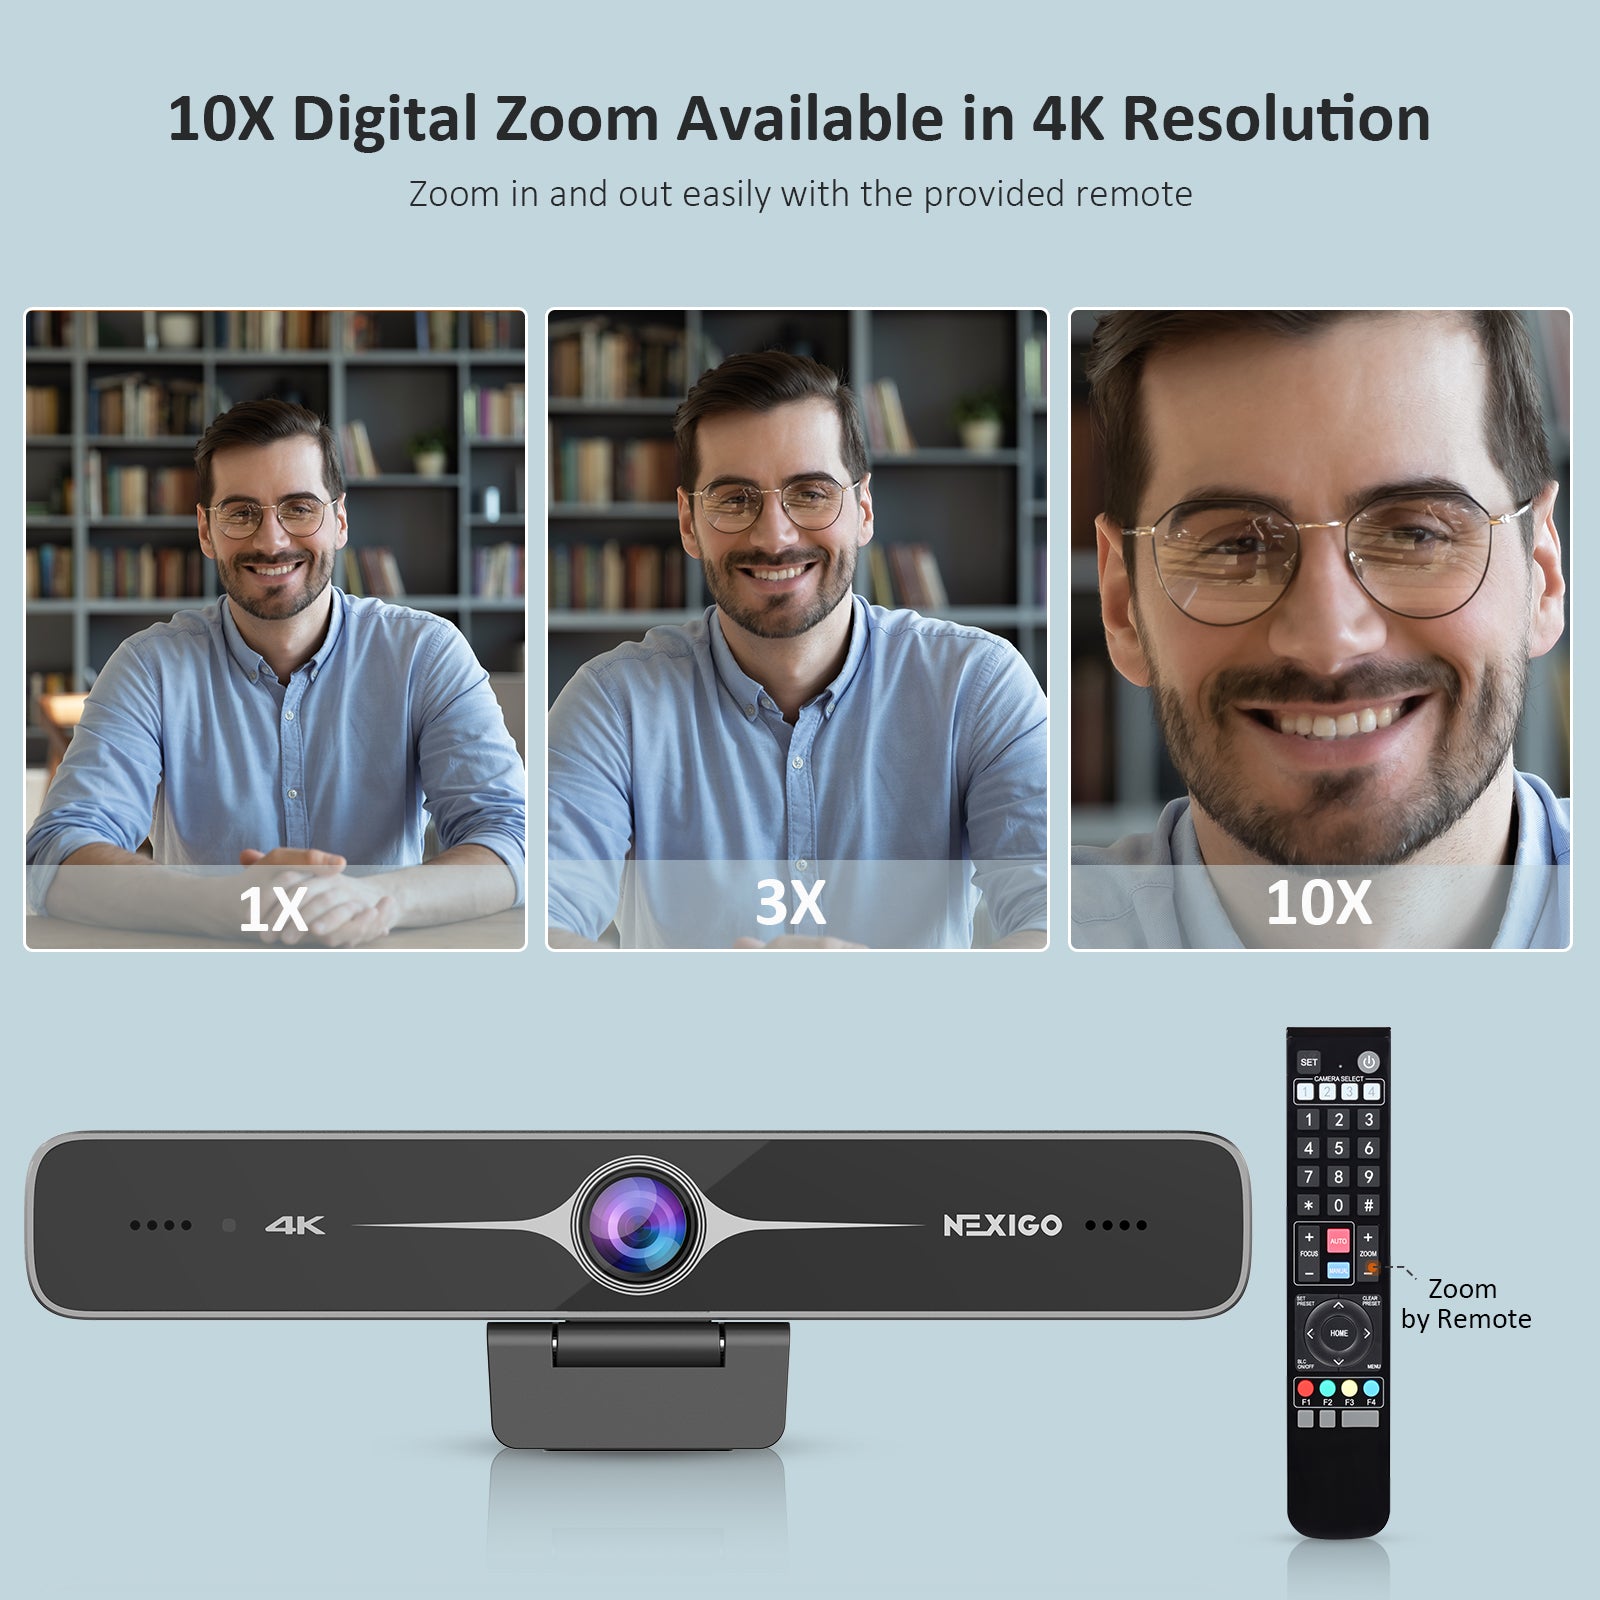 With a single press of a button, the NexiGo N970P webcam allows you to zoom in up to 10x. 